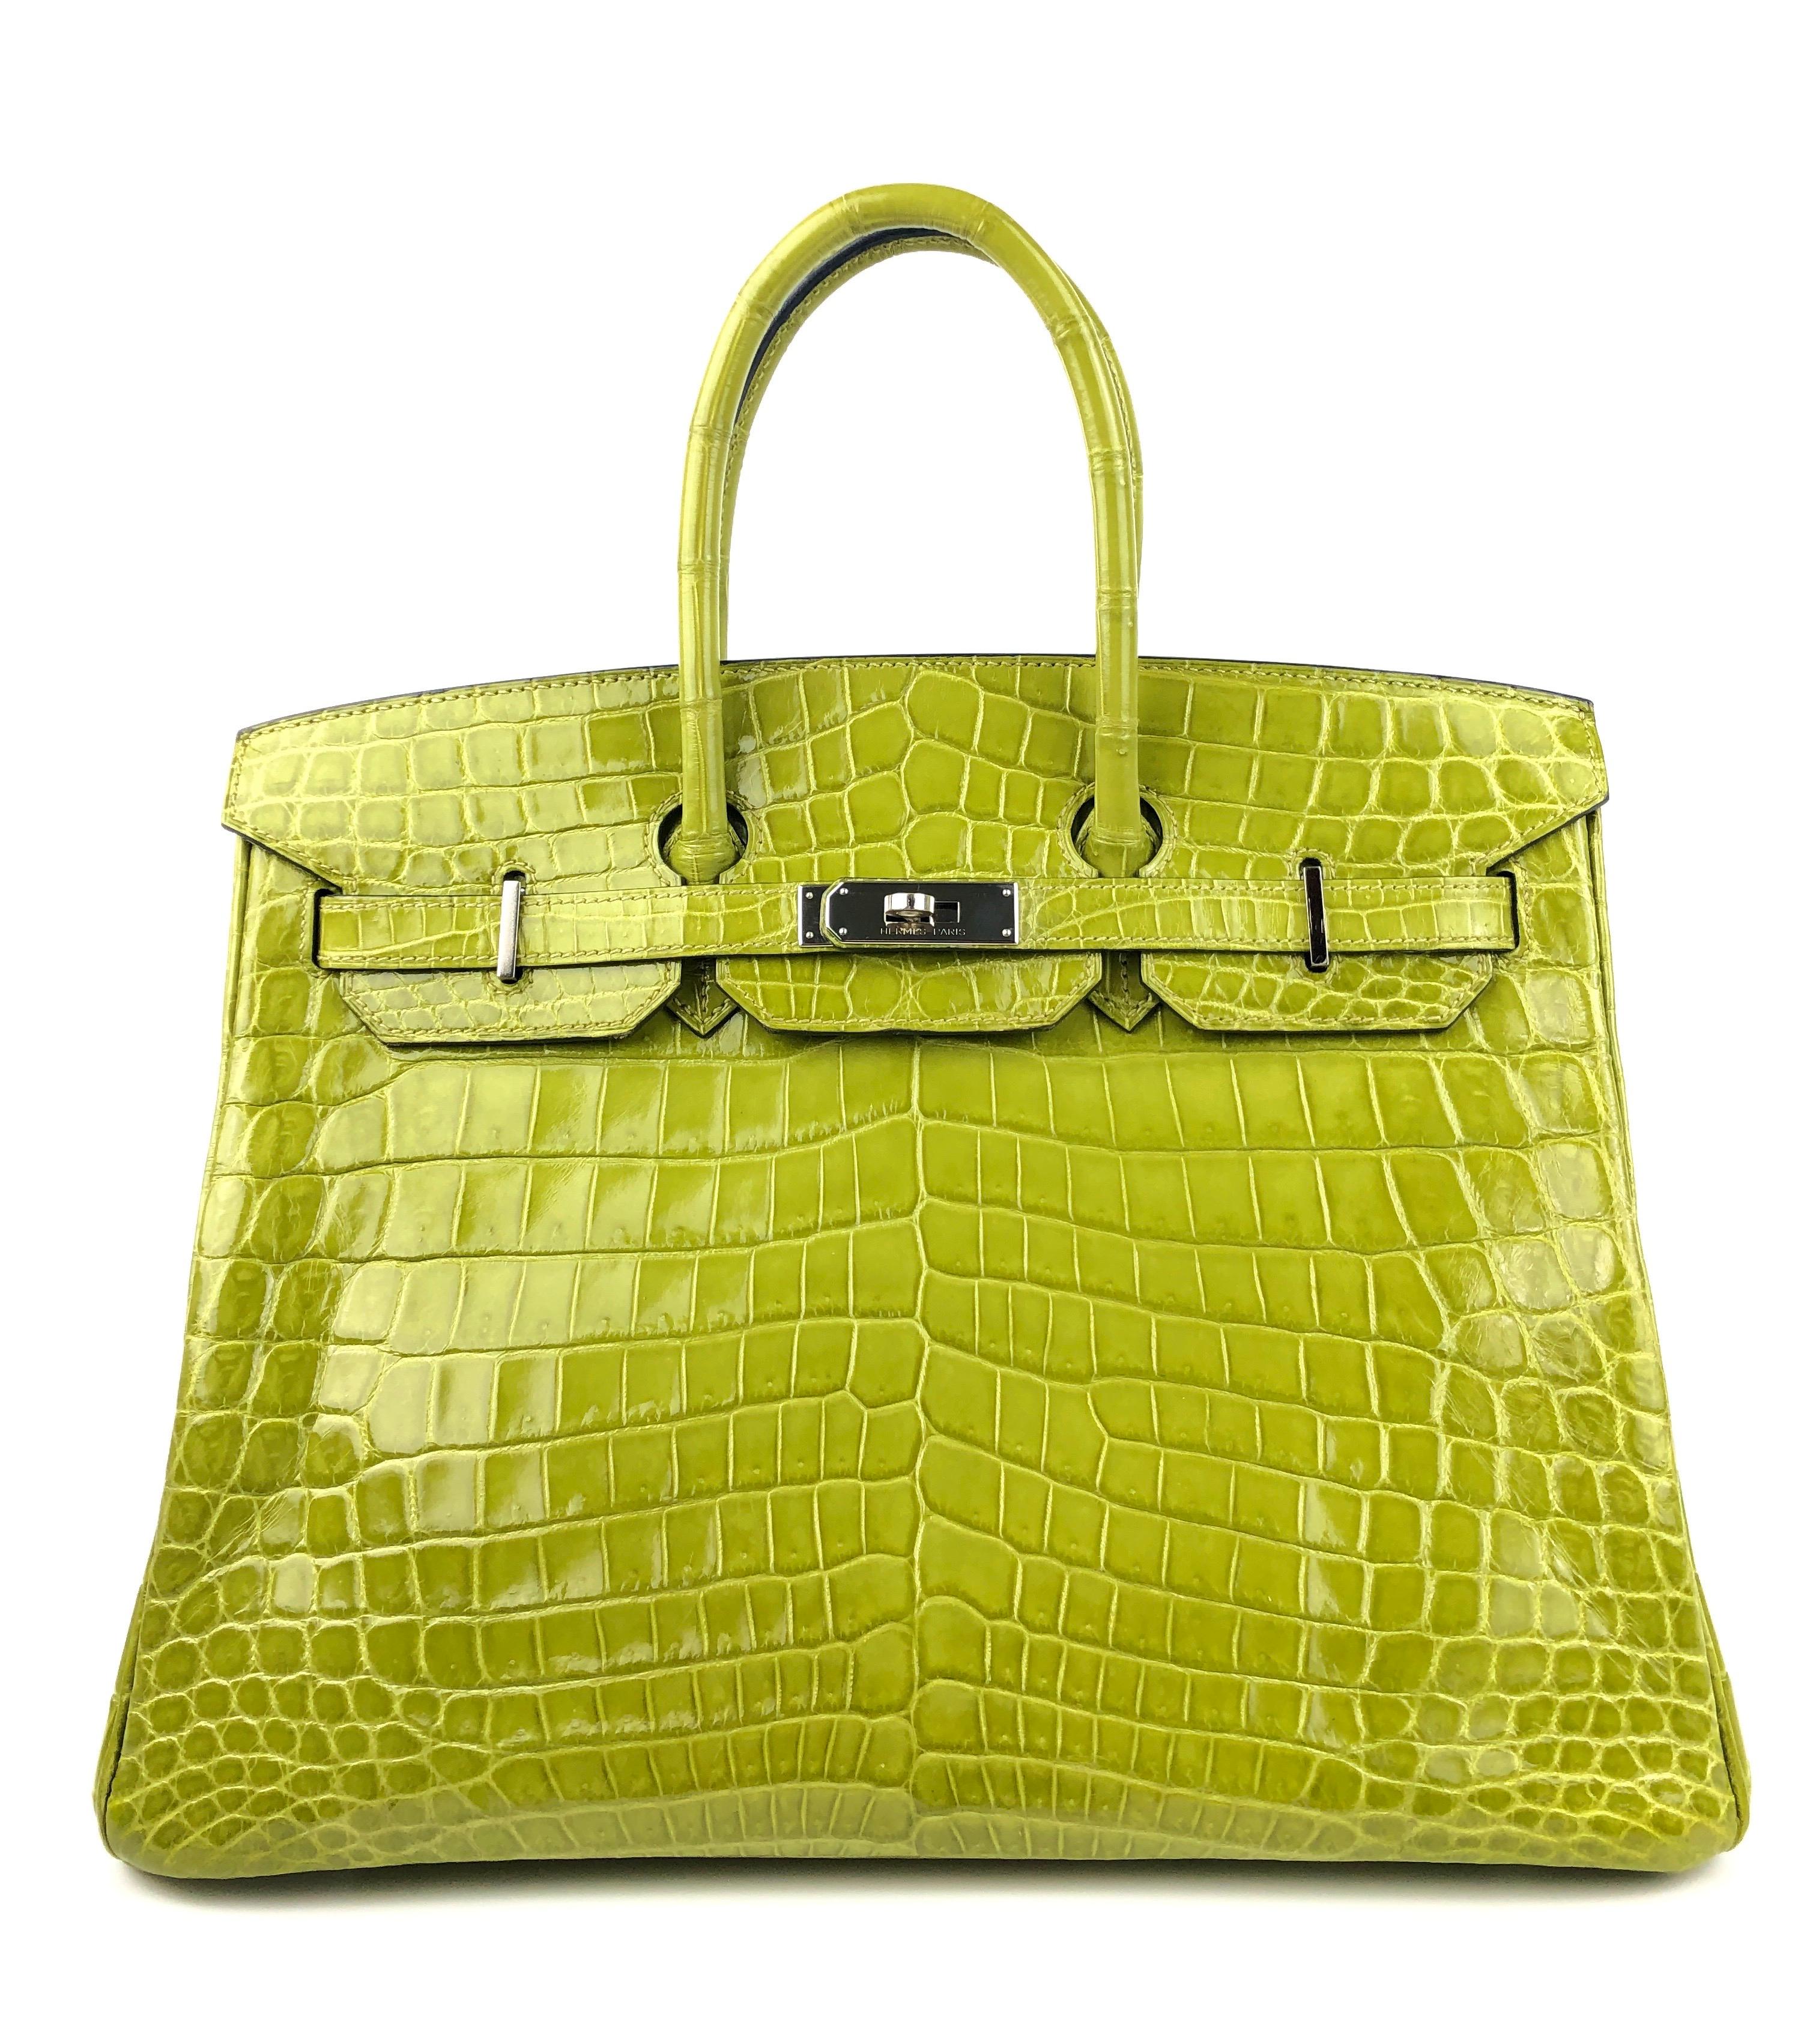 Stunning Hermes Birkin 35 Vert Anis Green Crocodile Palladium Hardware. Excellent condition, light hairlines on hardware, excellent corners and structure. 

Shop with Confidence from Lux Addicts. Authenticity Guaranteed! 